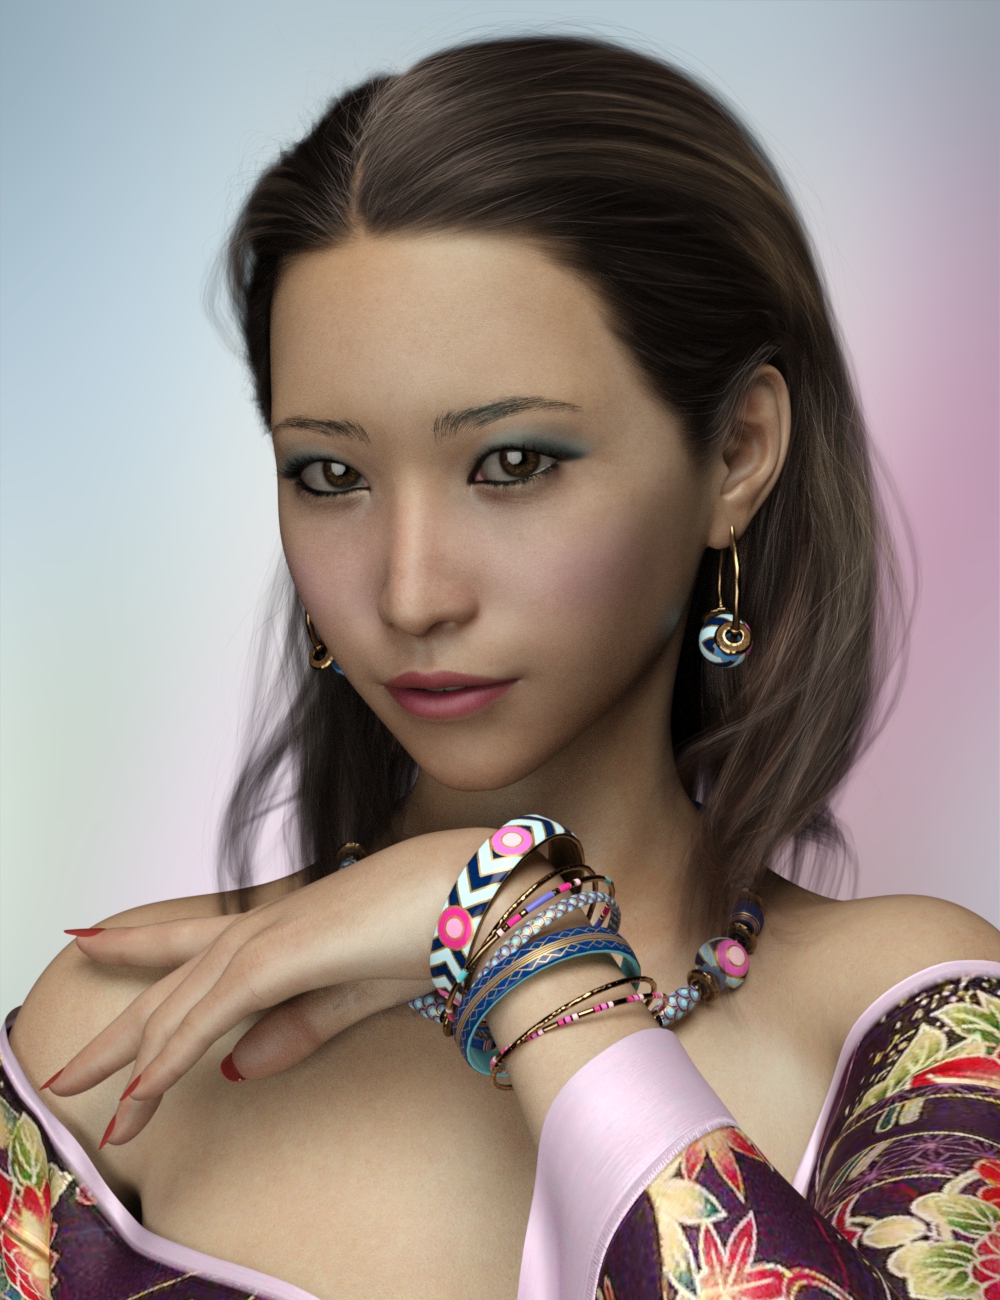 Higashi Le for Genesis 8 and 8.1 Female by: Warloc, 3D Models by Daz 3D